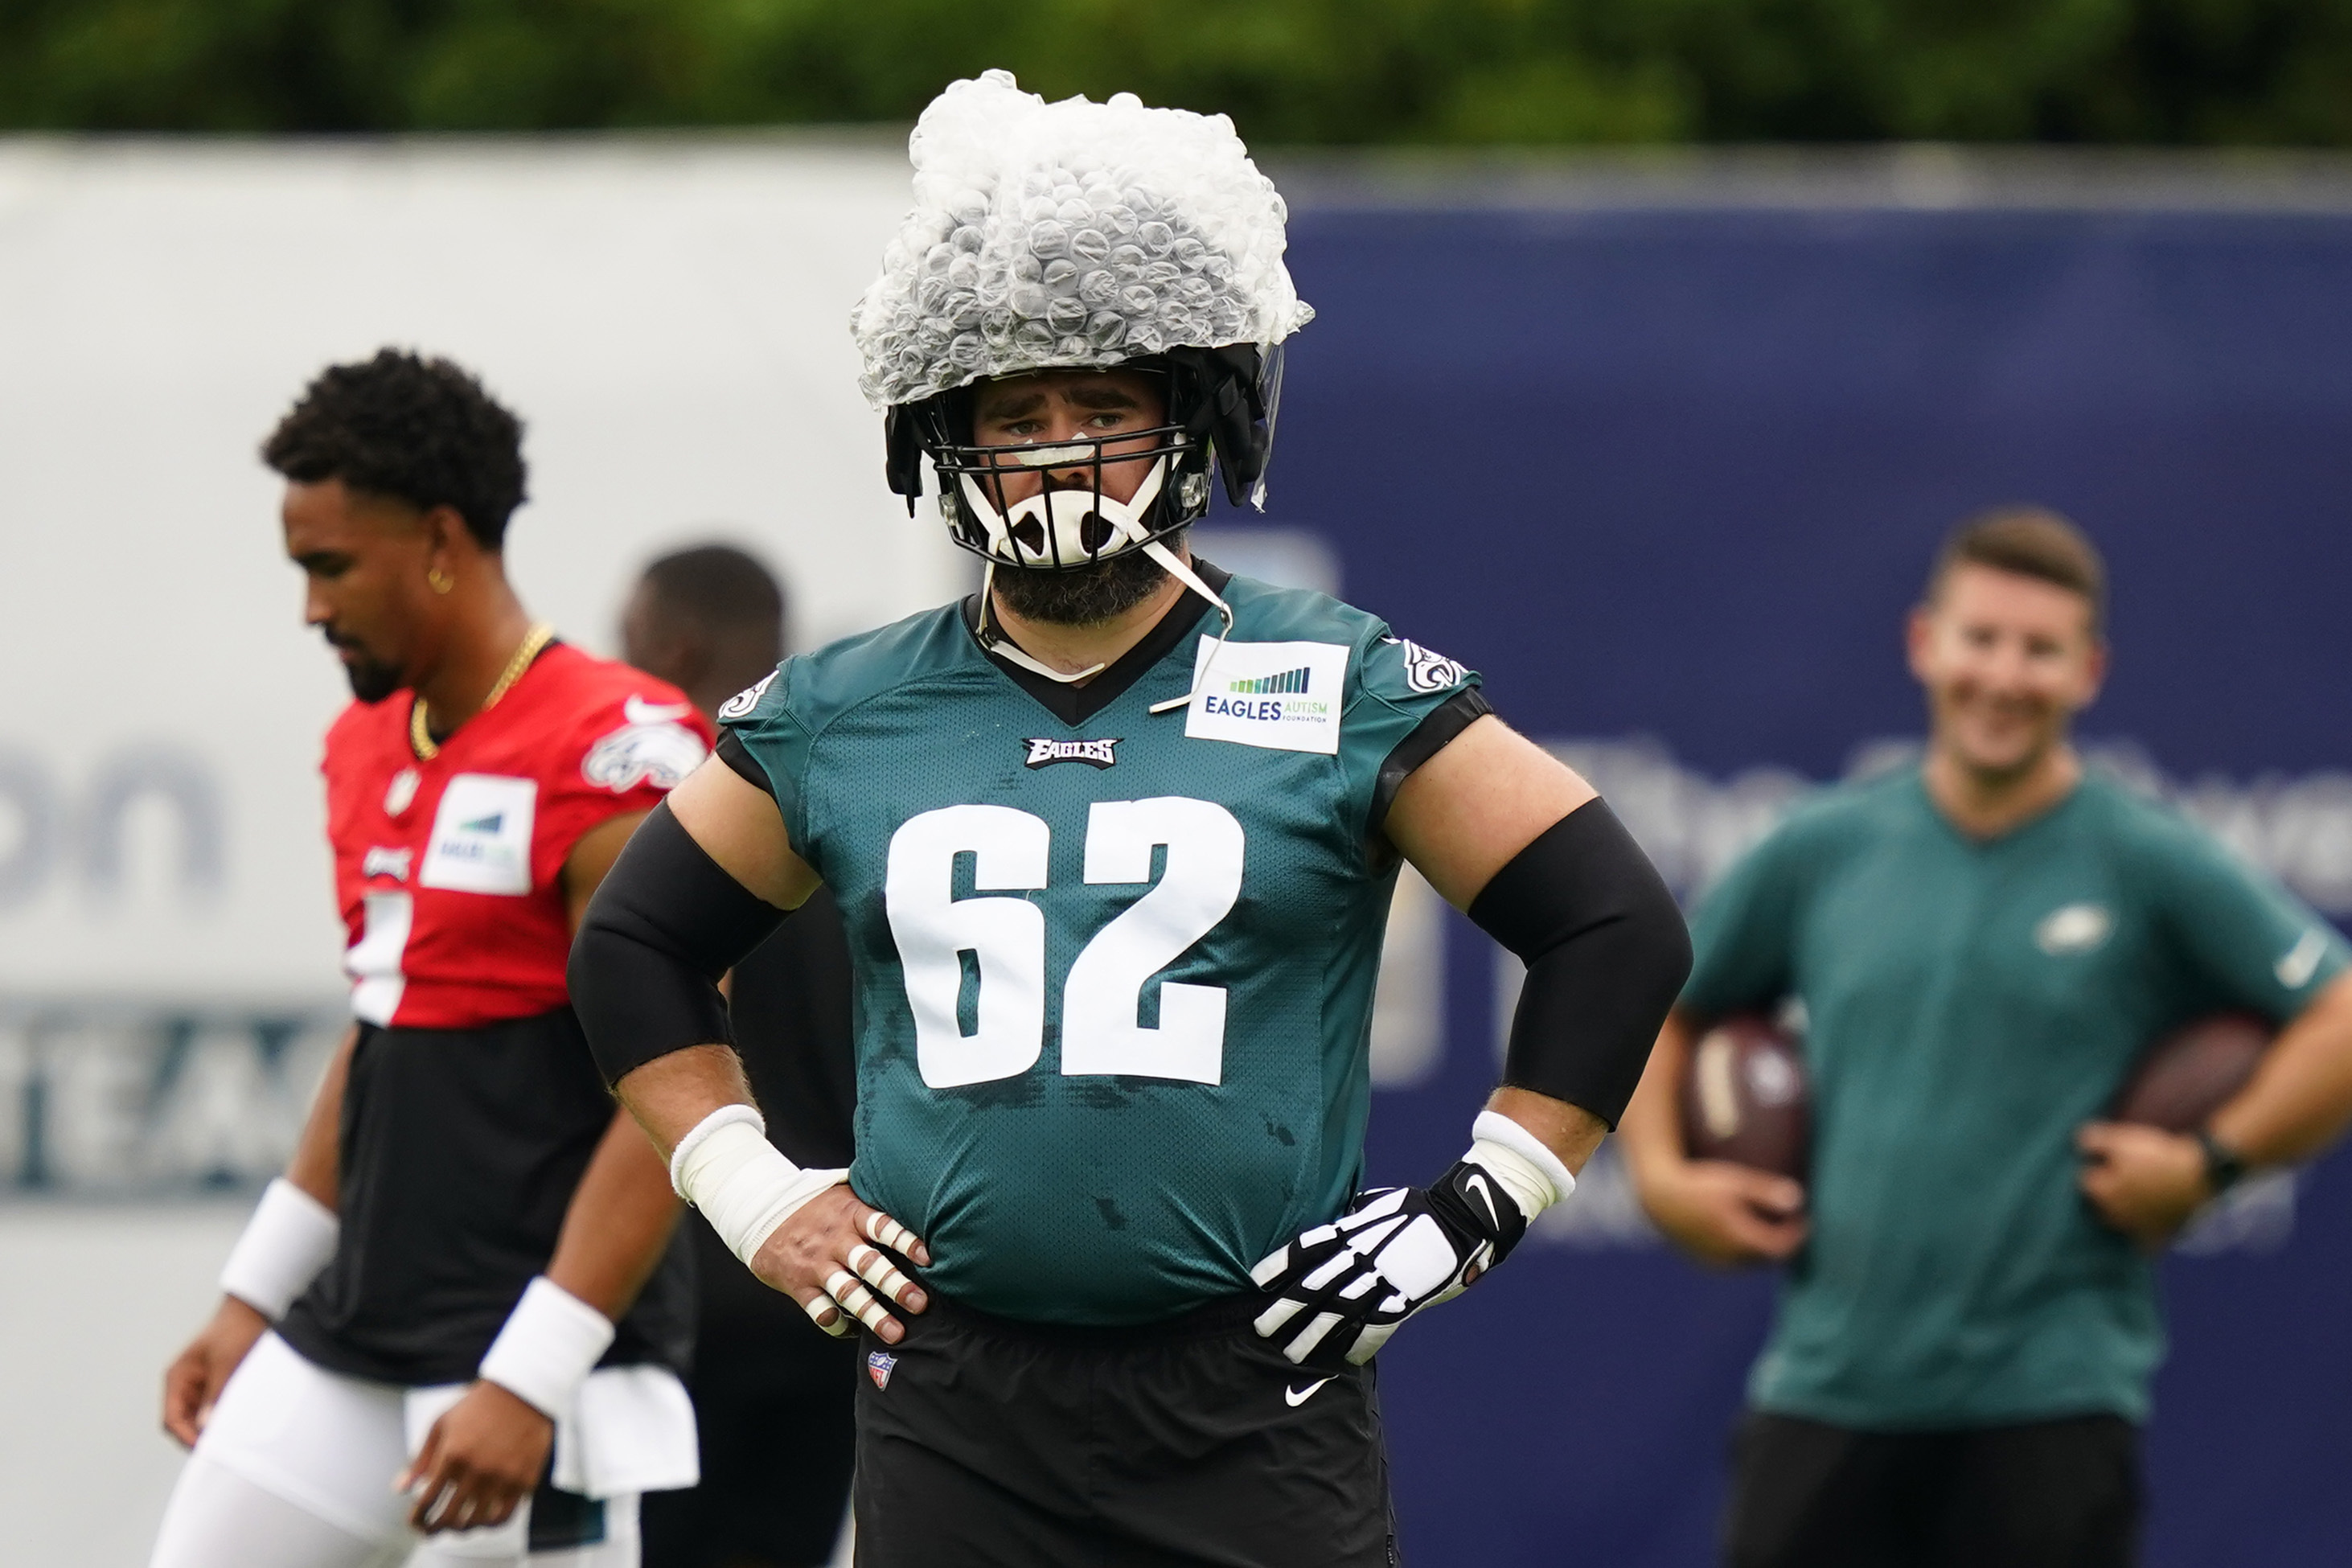 Eagles playoff win sparks sales of jerseys, Jason Kelce parade costume